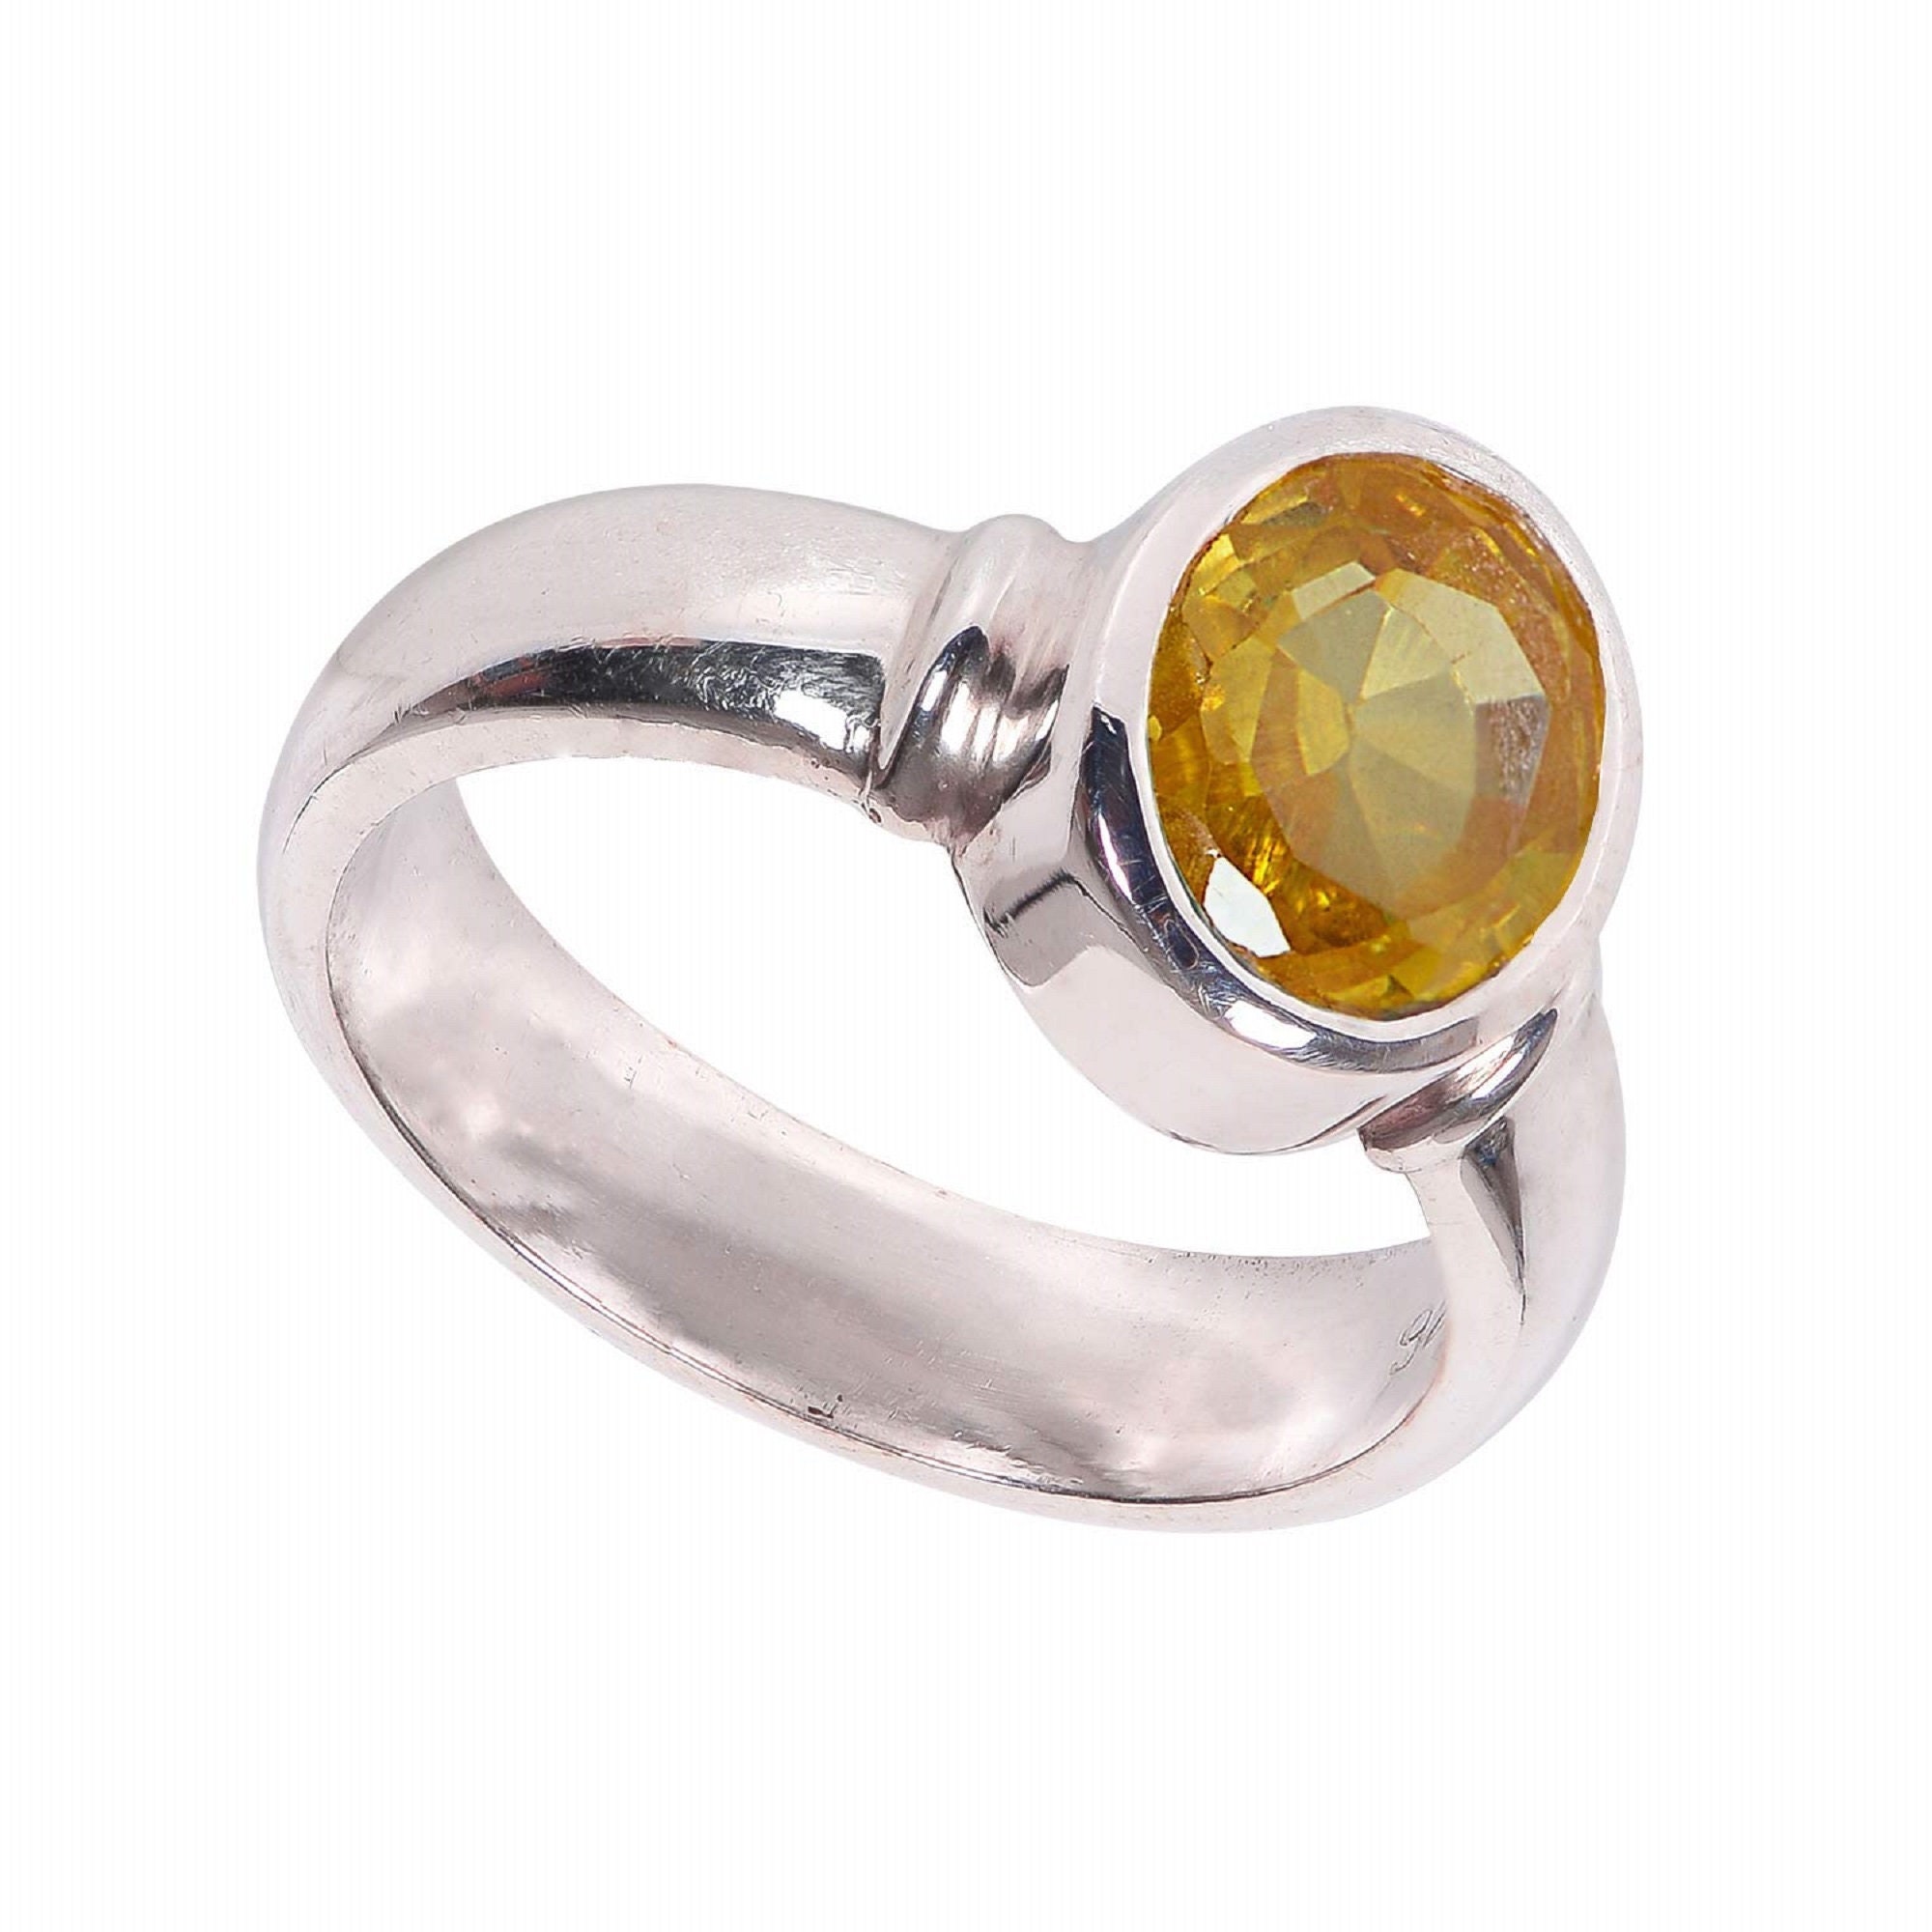 92% 7 Carat Yellow Sapphire Gemstone Sterling Silver Ring at Rs 501 in  Jaipur